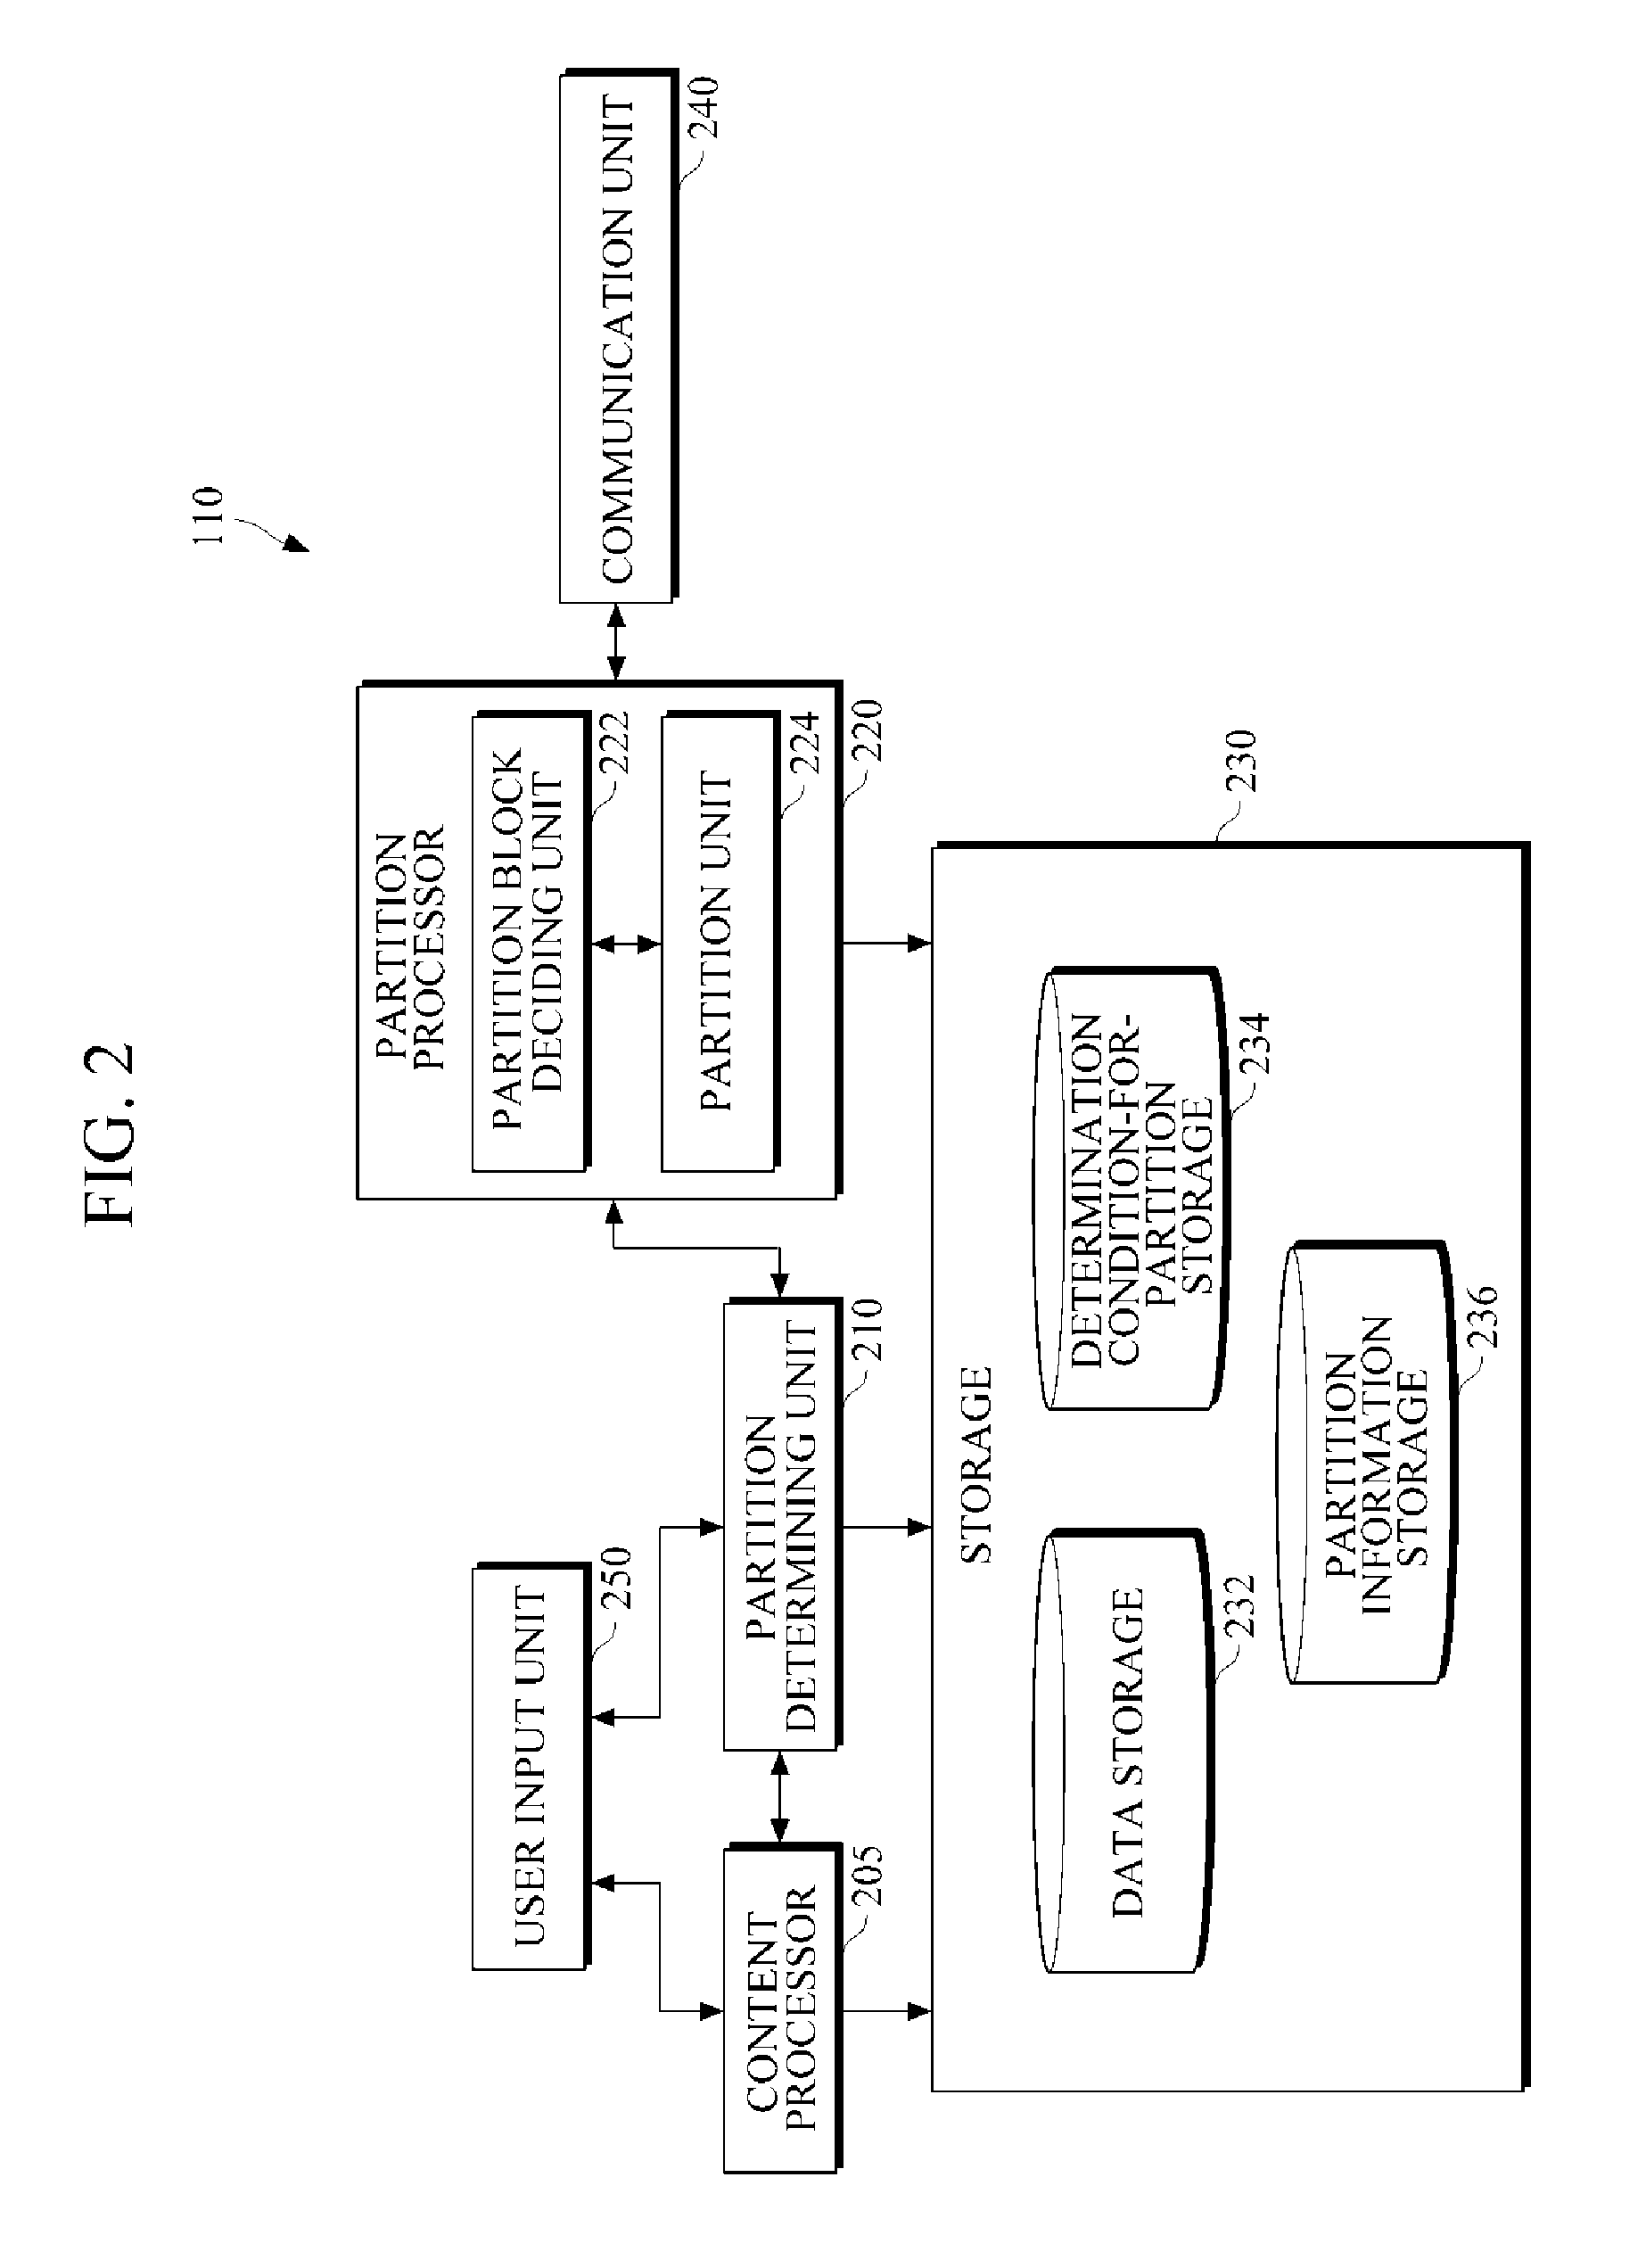 Apparatus and method for processing partitioned data for securing content